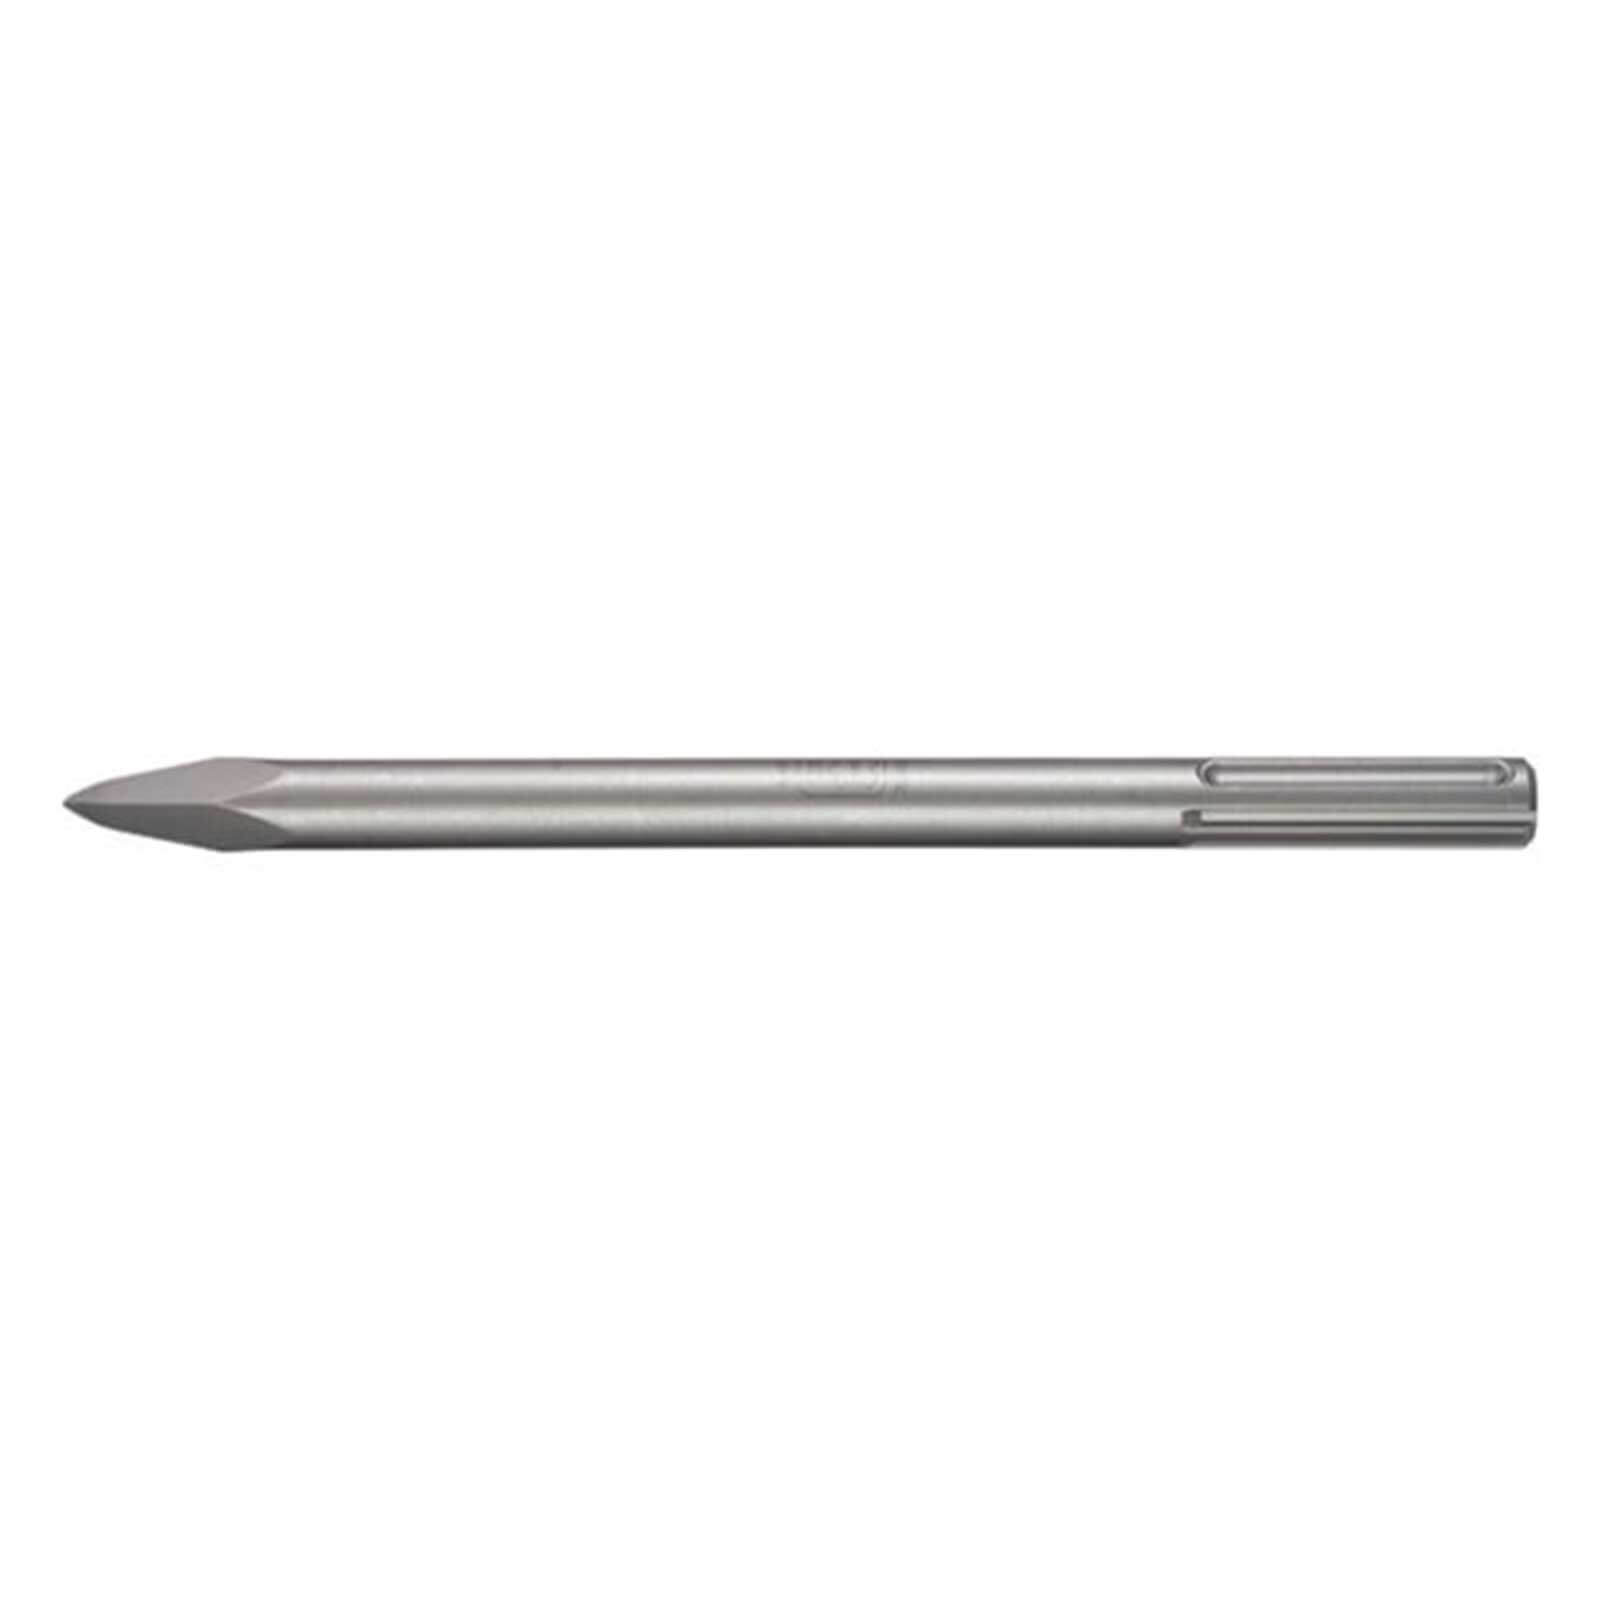 Photo of Makita Sds Max Pointed Chisel 280mm